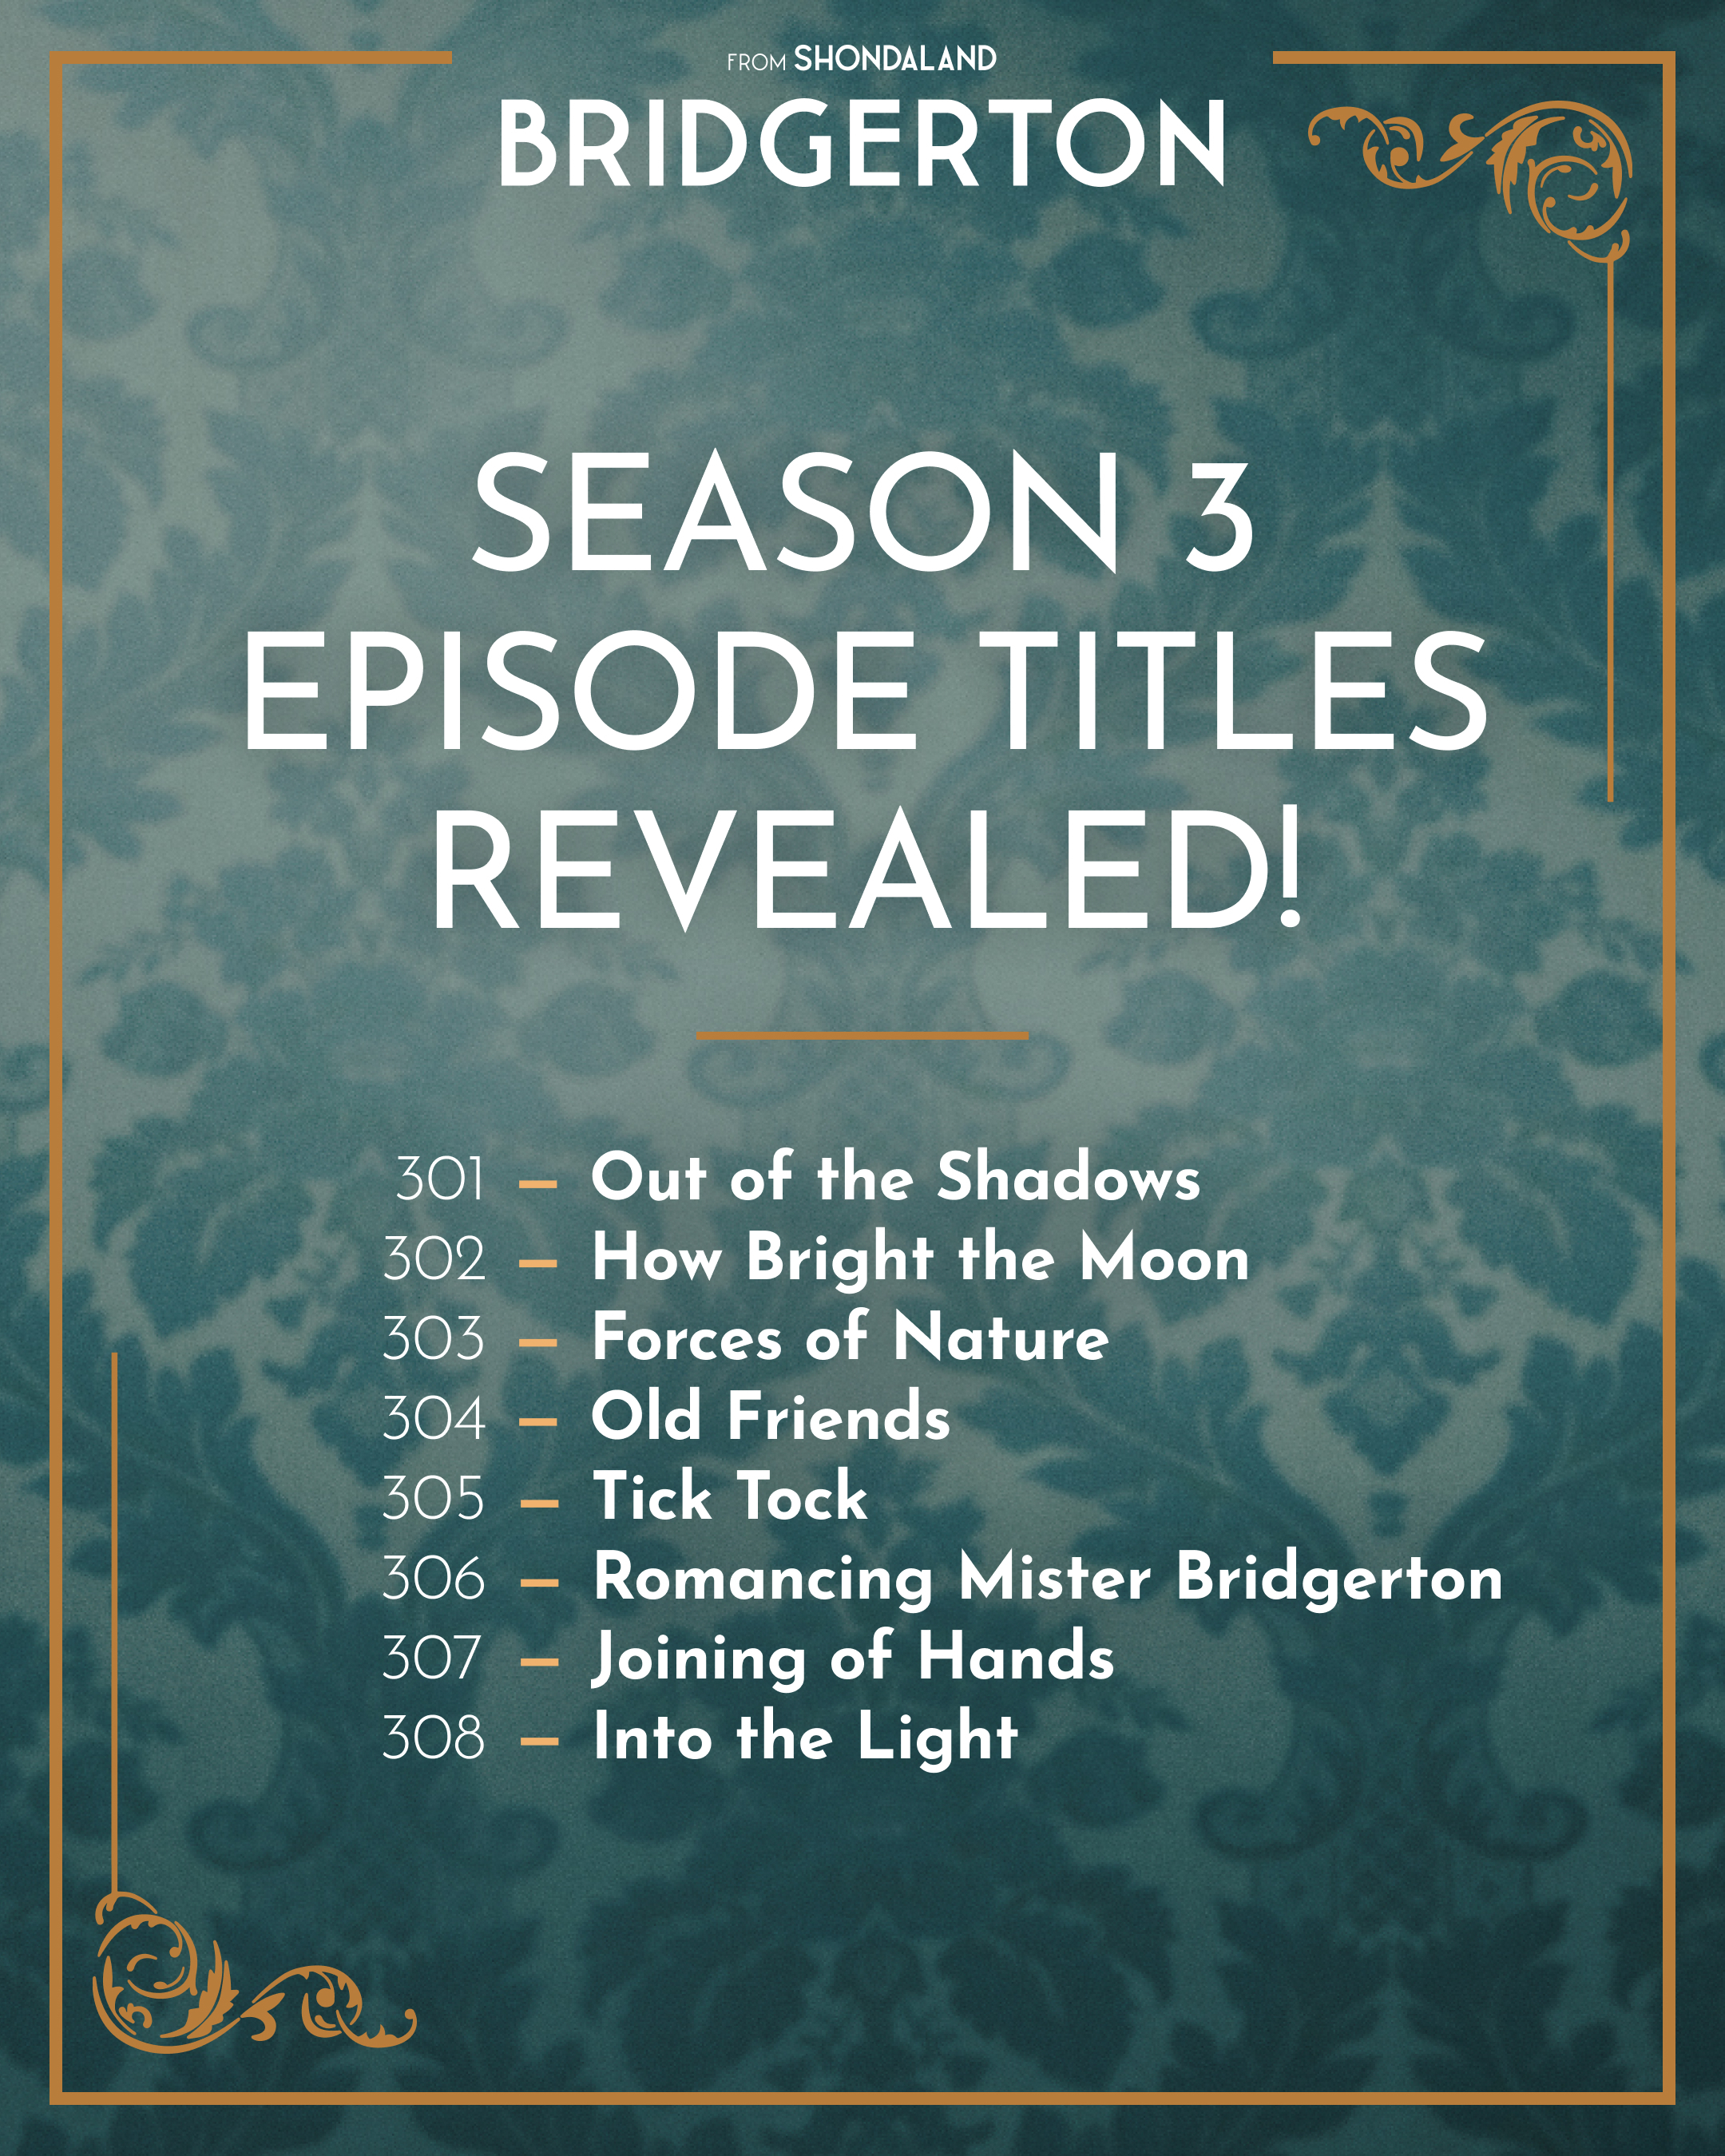 Season 3 episode titles for Bridgerton revealed, listing eight episodes with thematic names